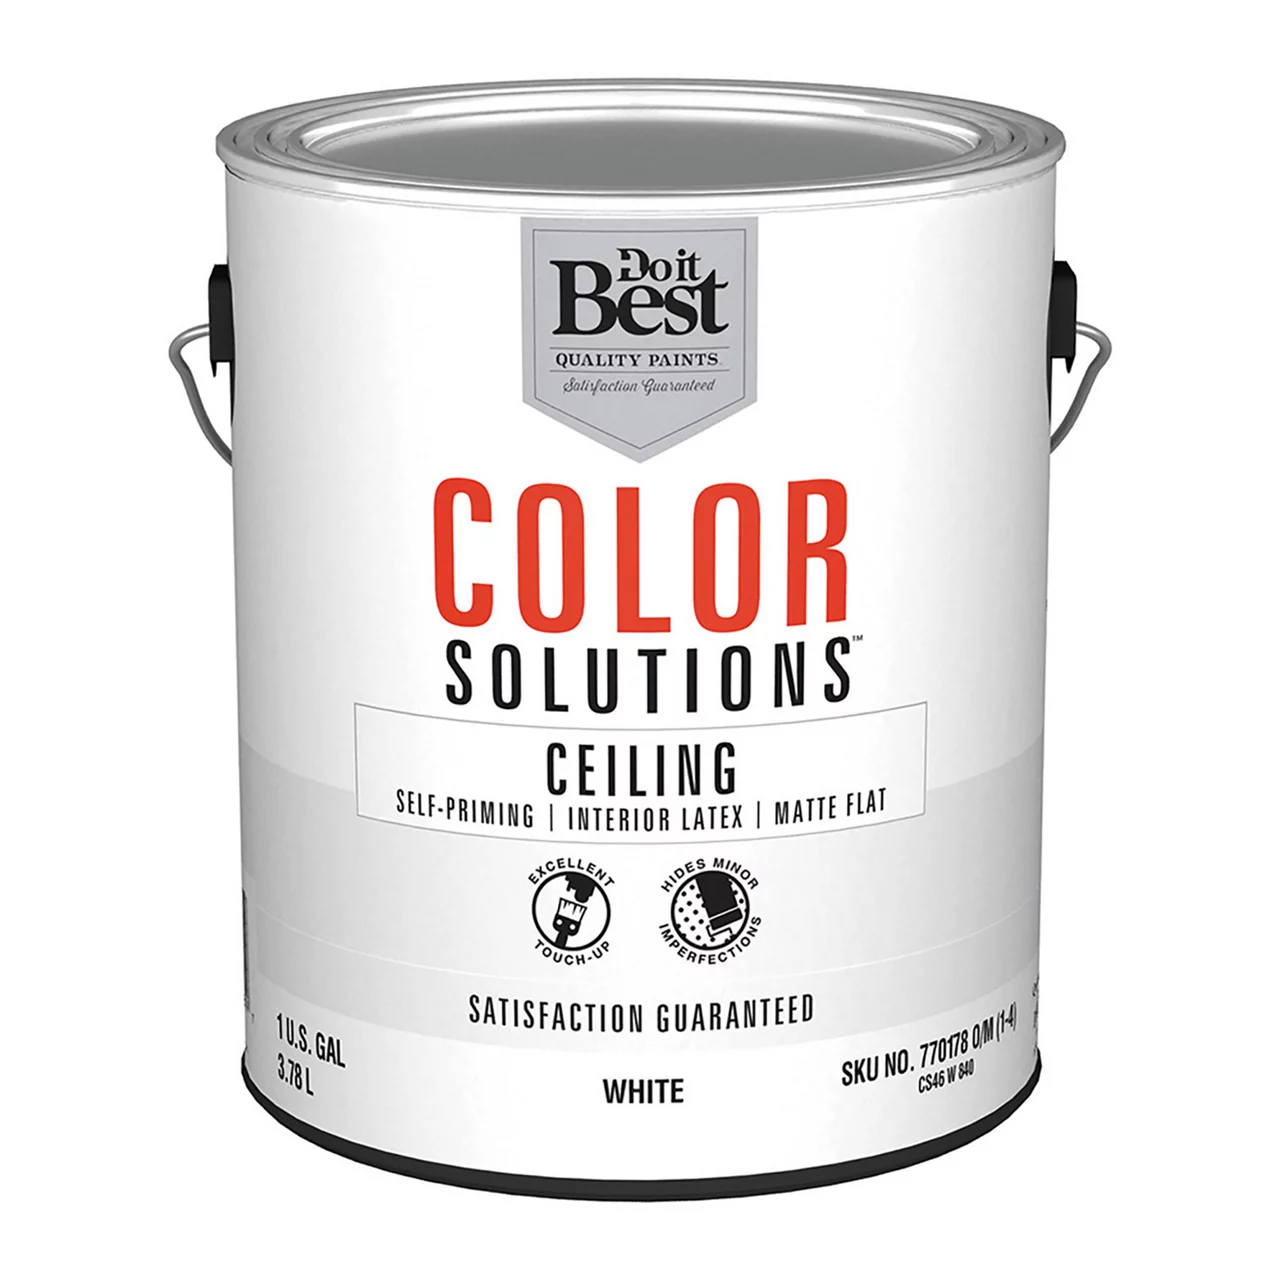 Color Solutions Silver Ceiling Paint